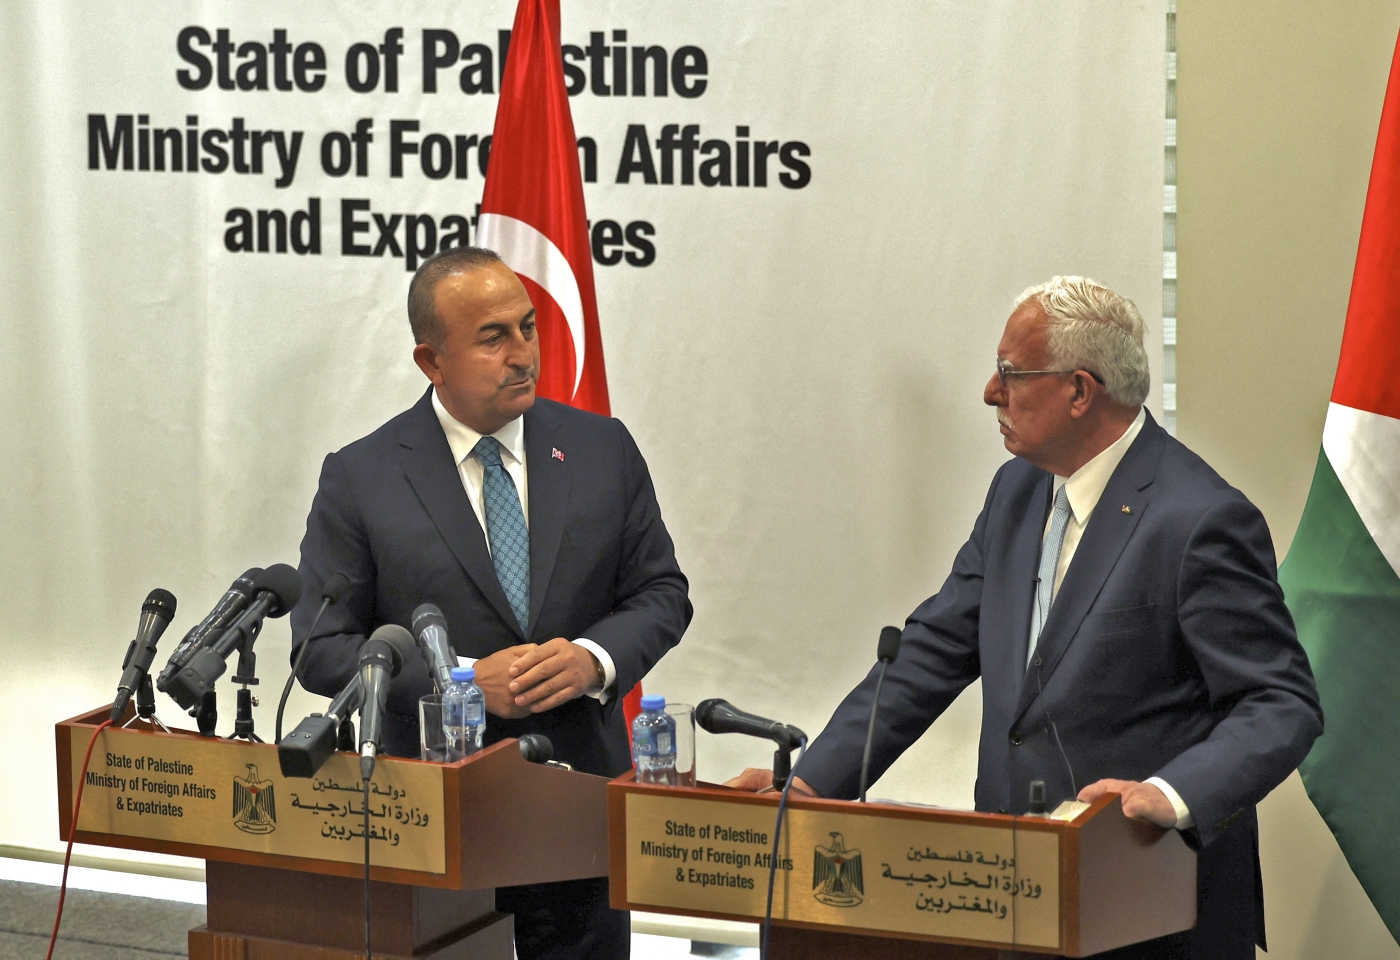 Palestinian Foreign Minister Riyad al-Maliki (R) and Turkish Foreign Minister Mevlut Cavusoglu attend a press conference after meeting in the city of Ramallah in the occupied West Bank on 24 May 2022 (AFP)